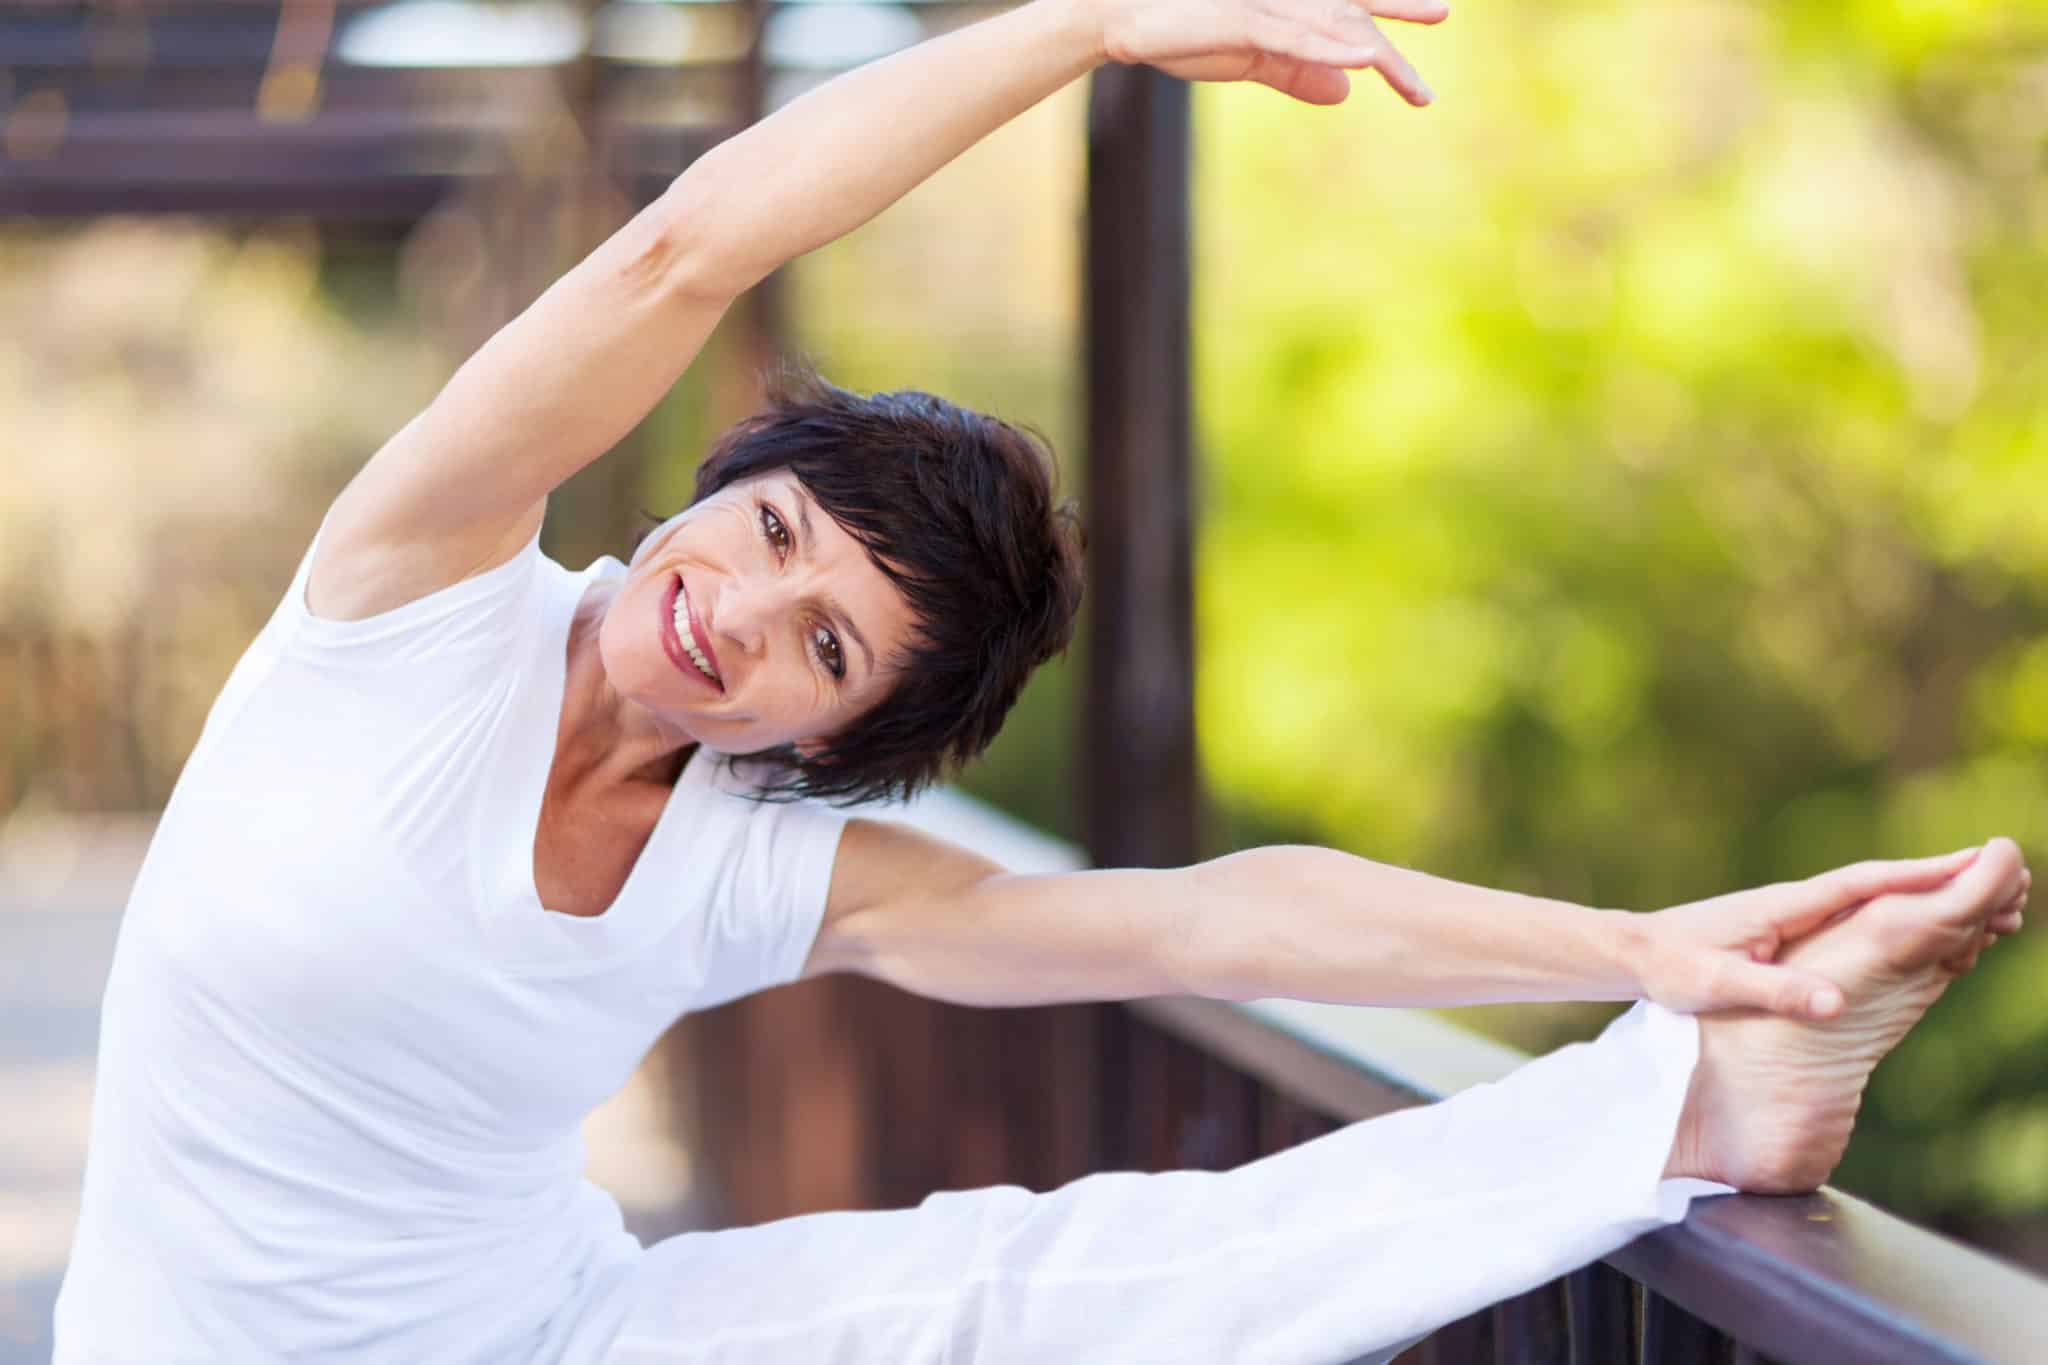 Middle aged, happy woman doing full body stretch